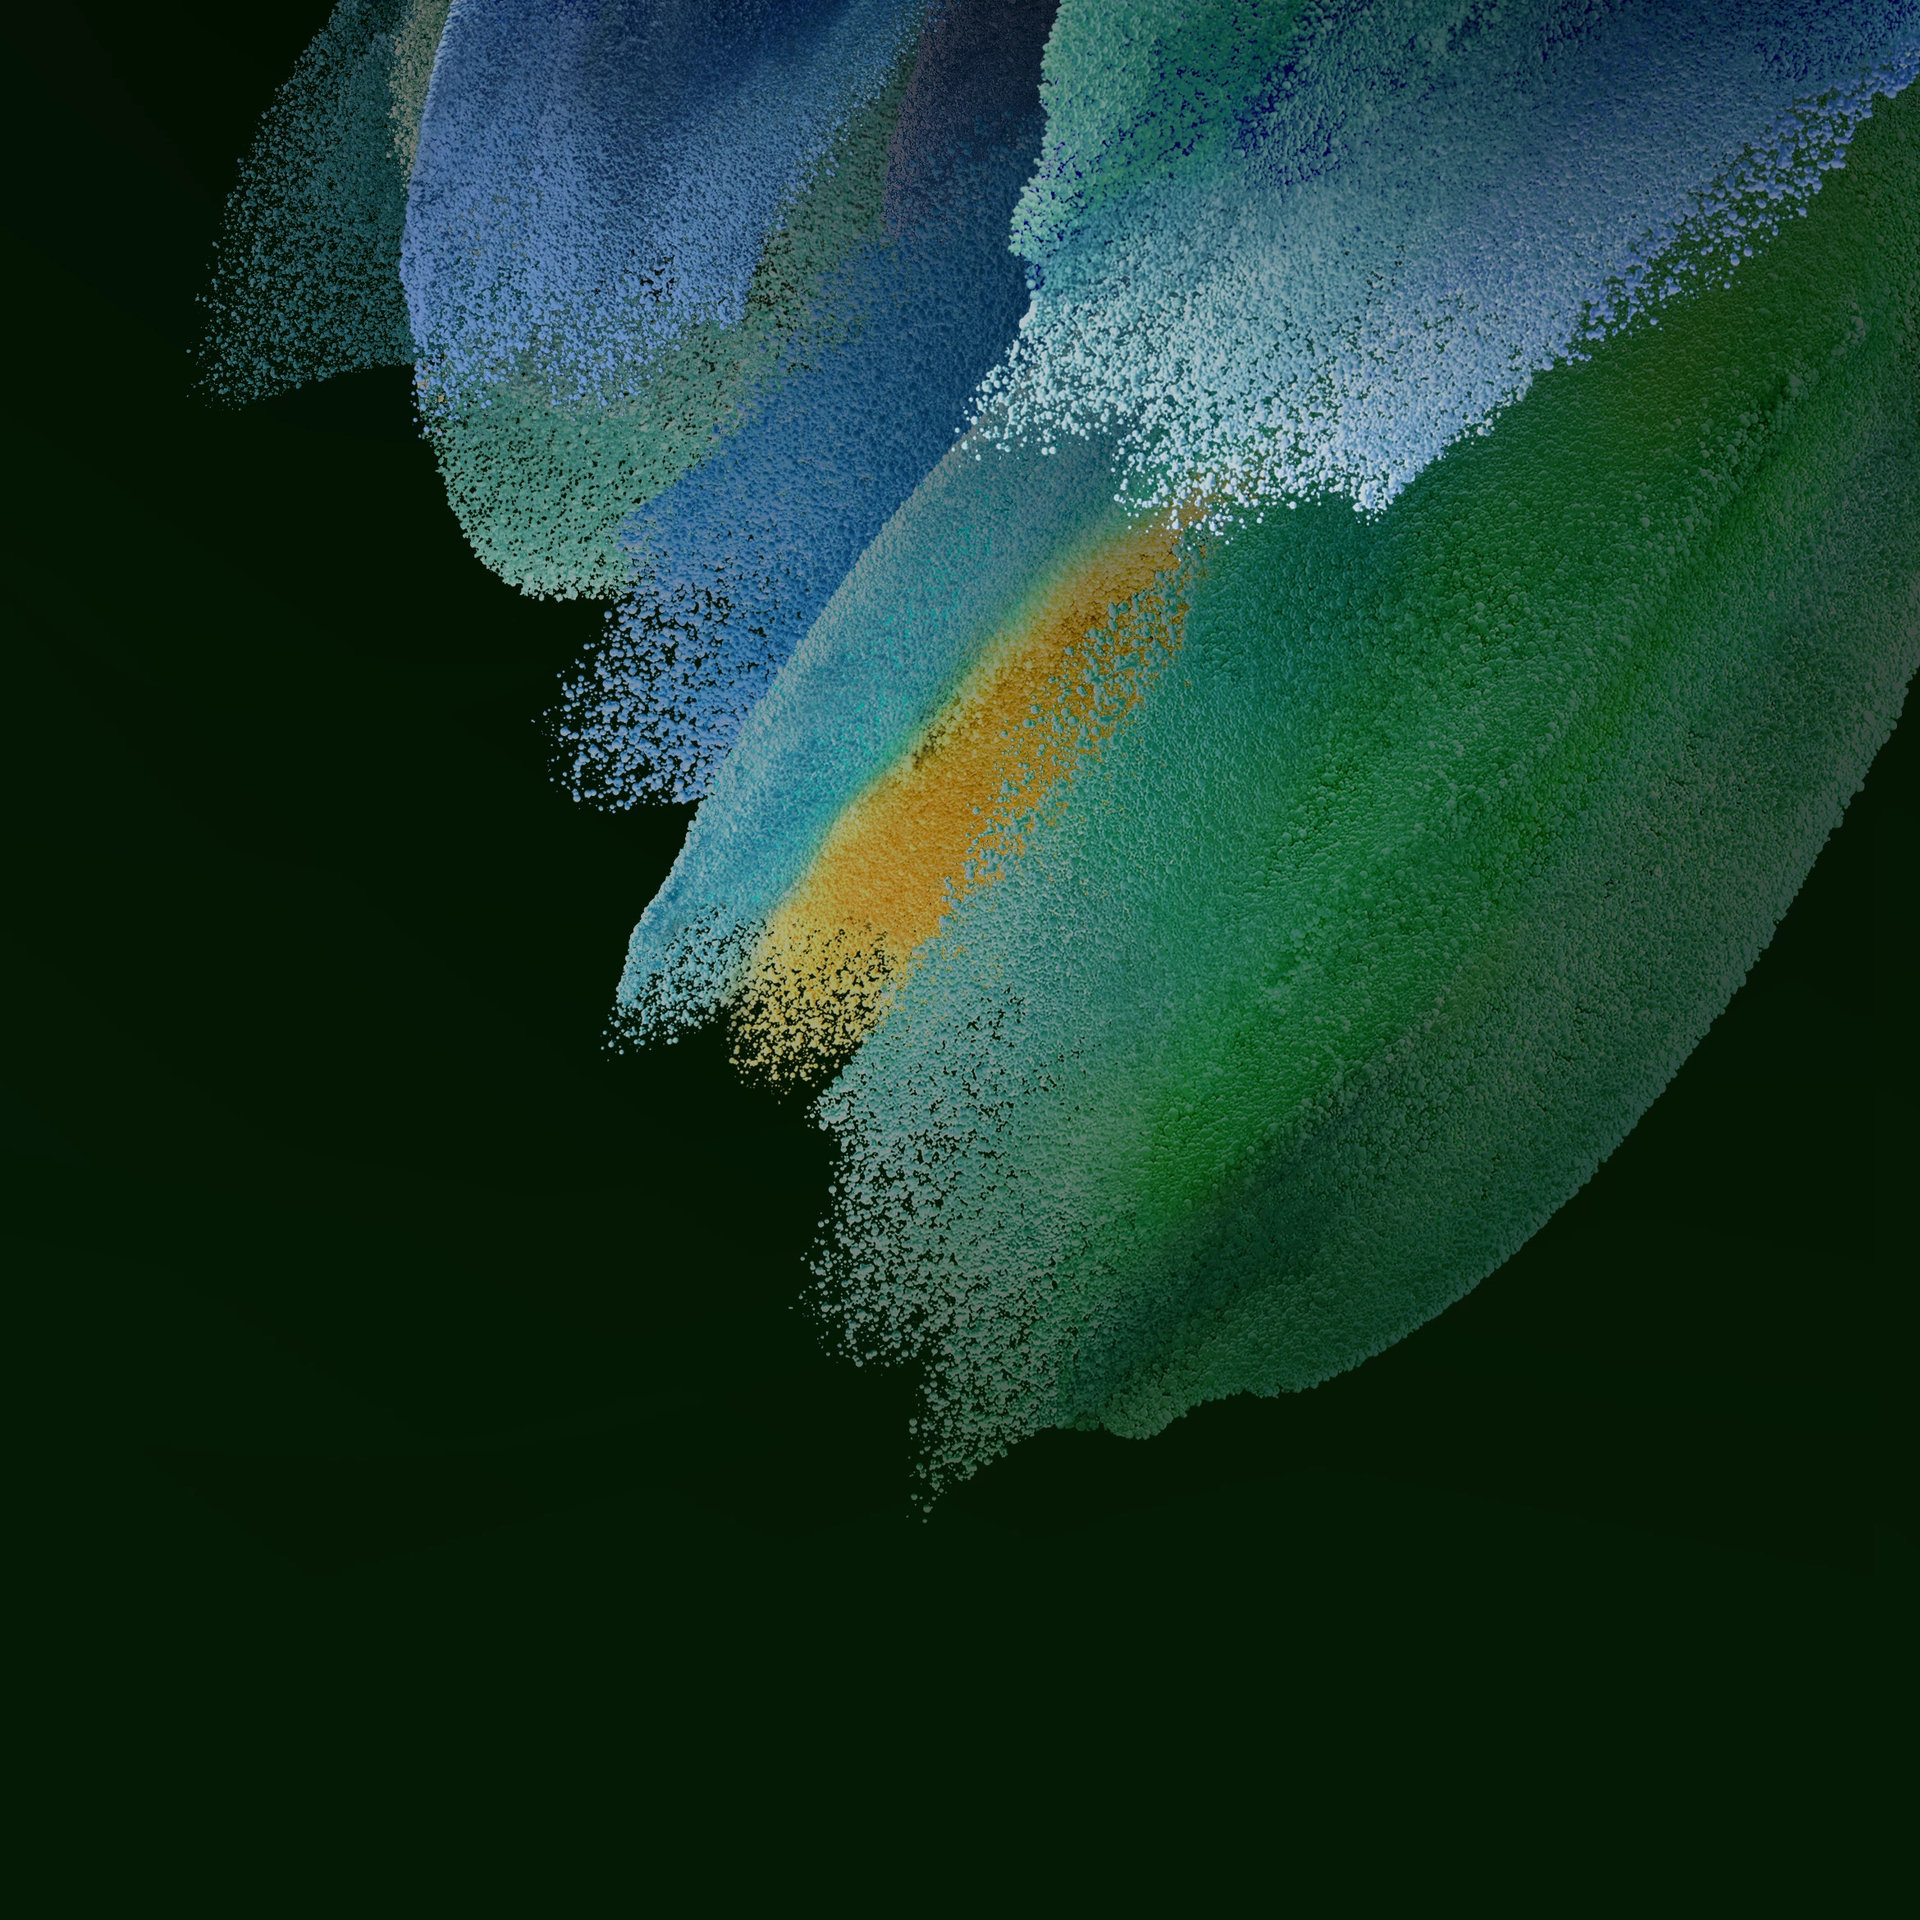 Samsung Galaxy S21 FE Wallpapers 1